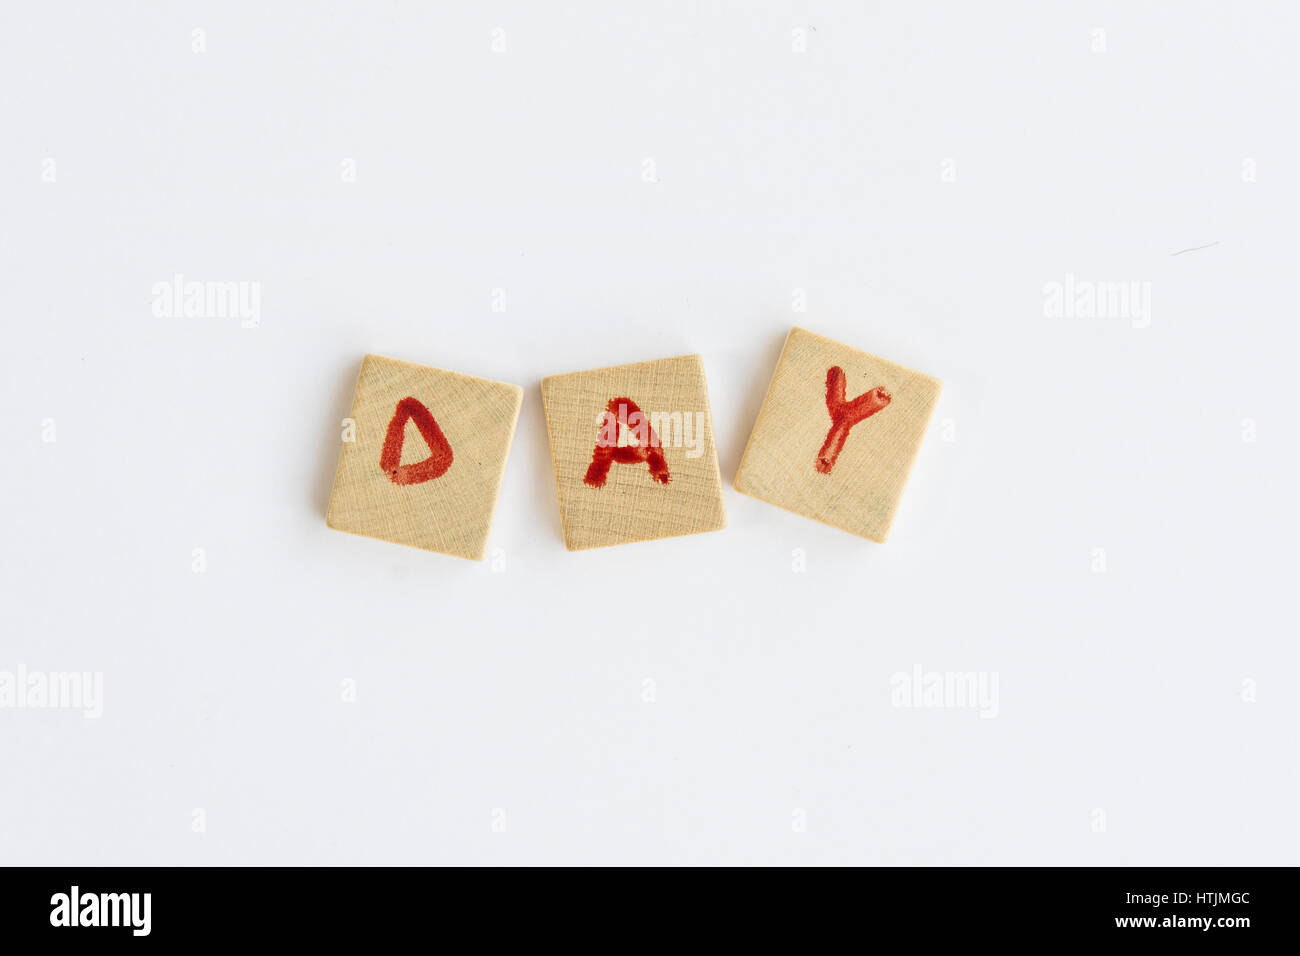 the word Day  formed with letters written on squares of wood dowels Stock Photo